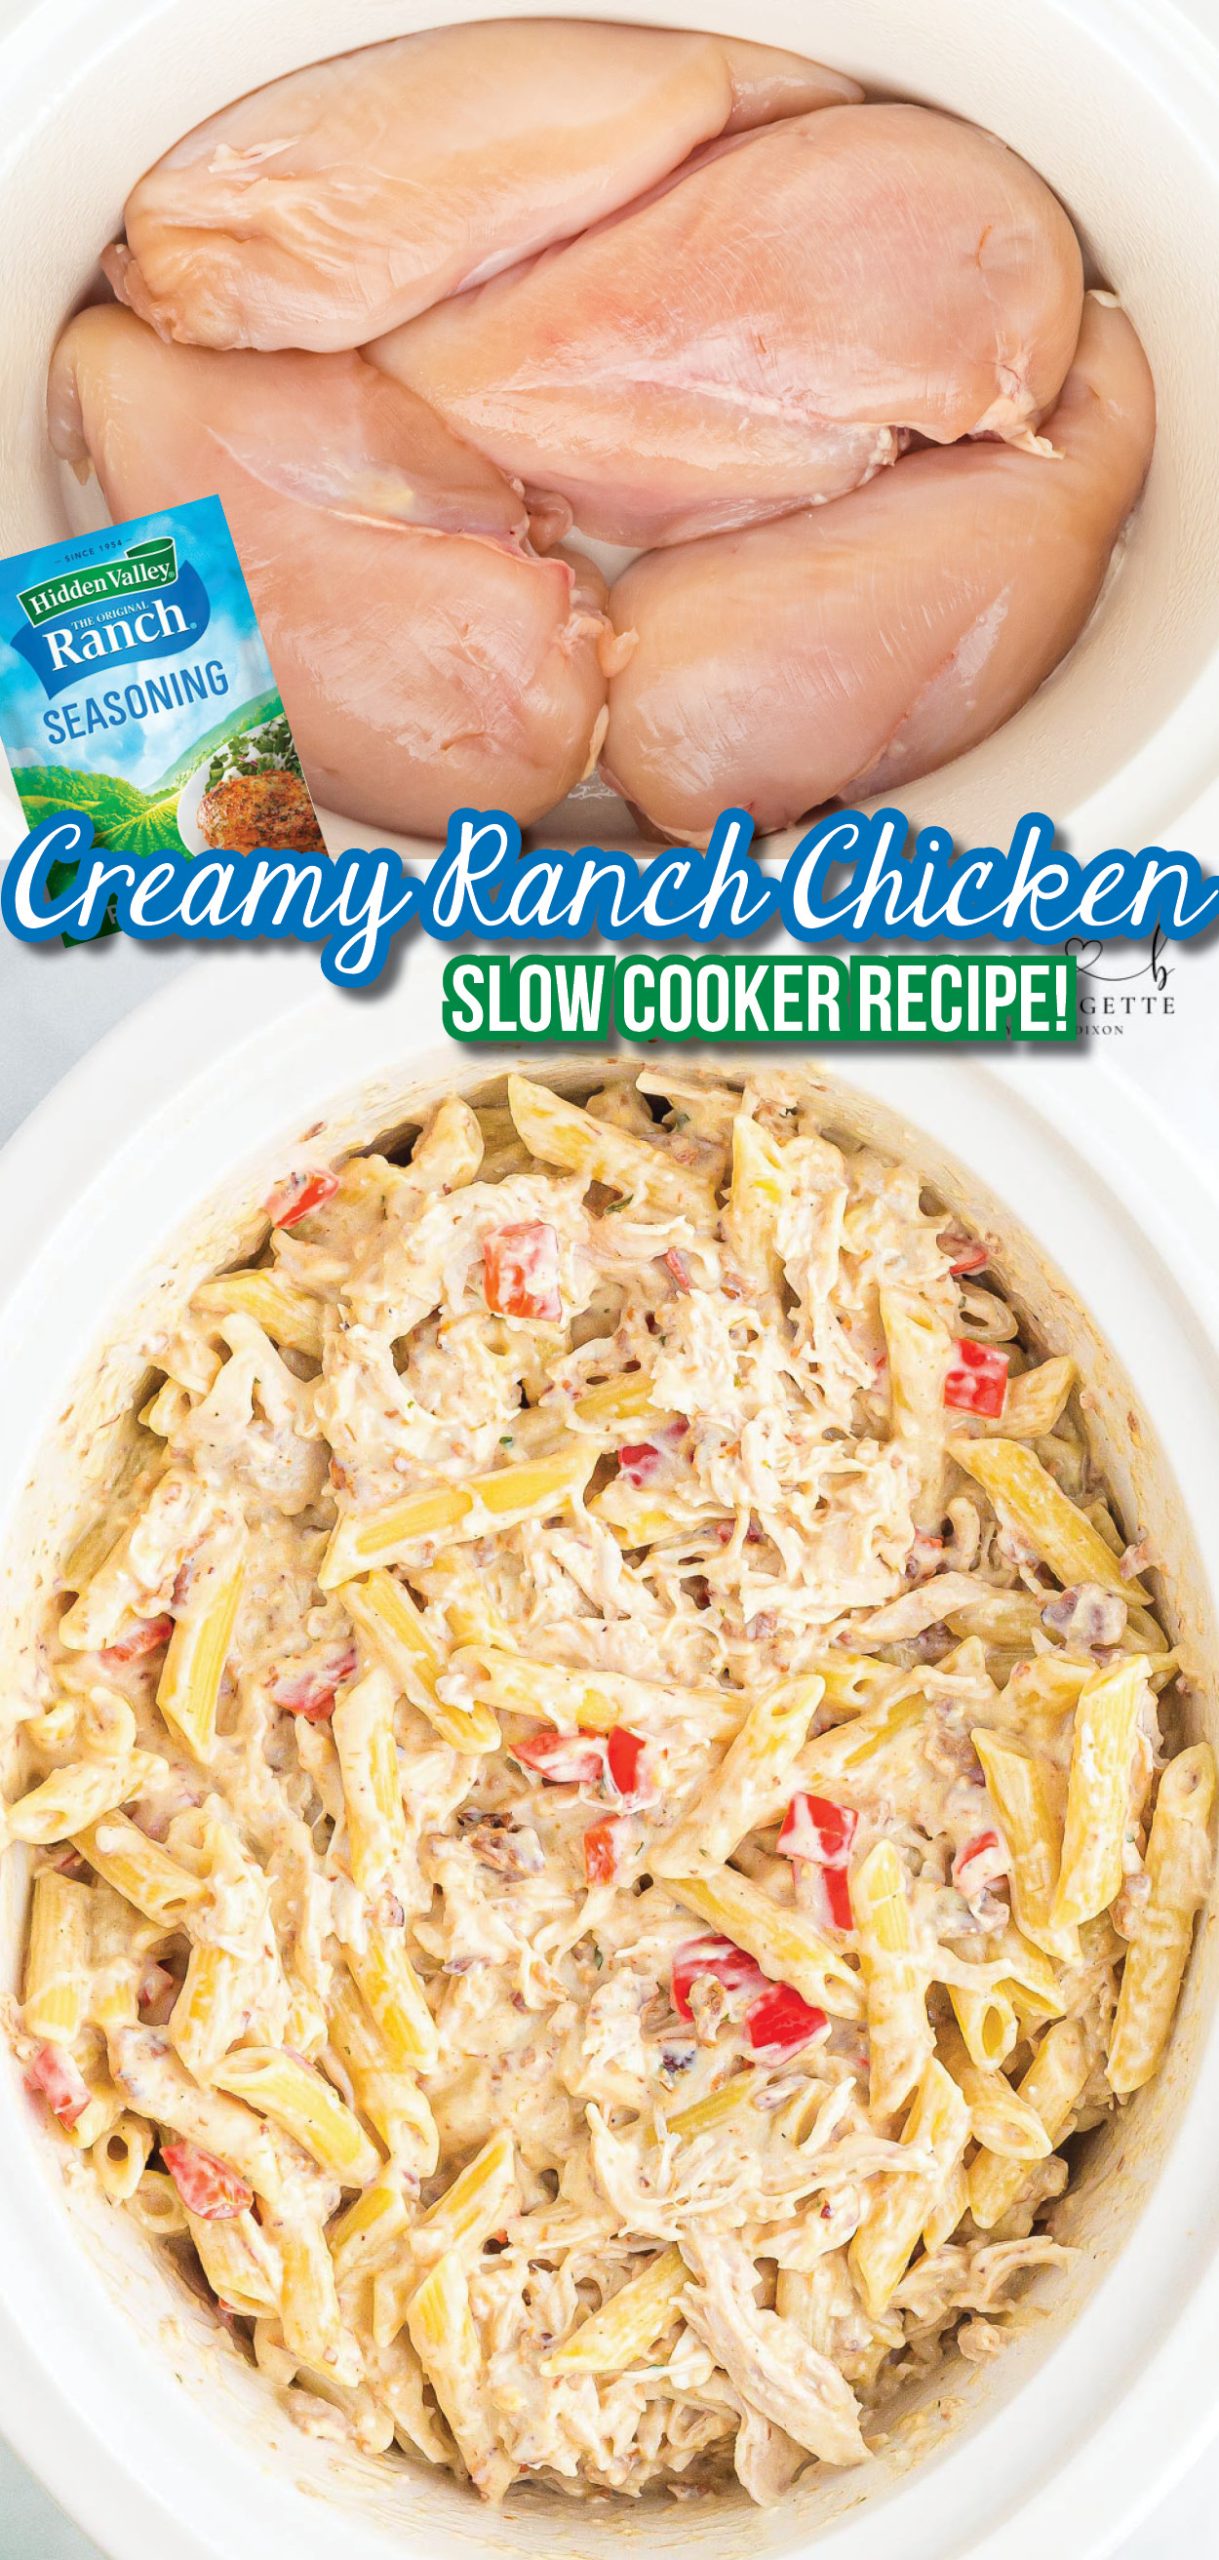 Slow Cooker Crock Pot Creamy Ranch Chicken recipe! A seriously addicting, creamy, comfort food ranch chicken recipe that you will love bite after bite!